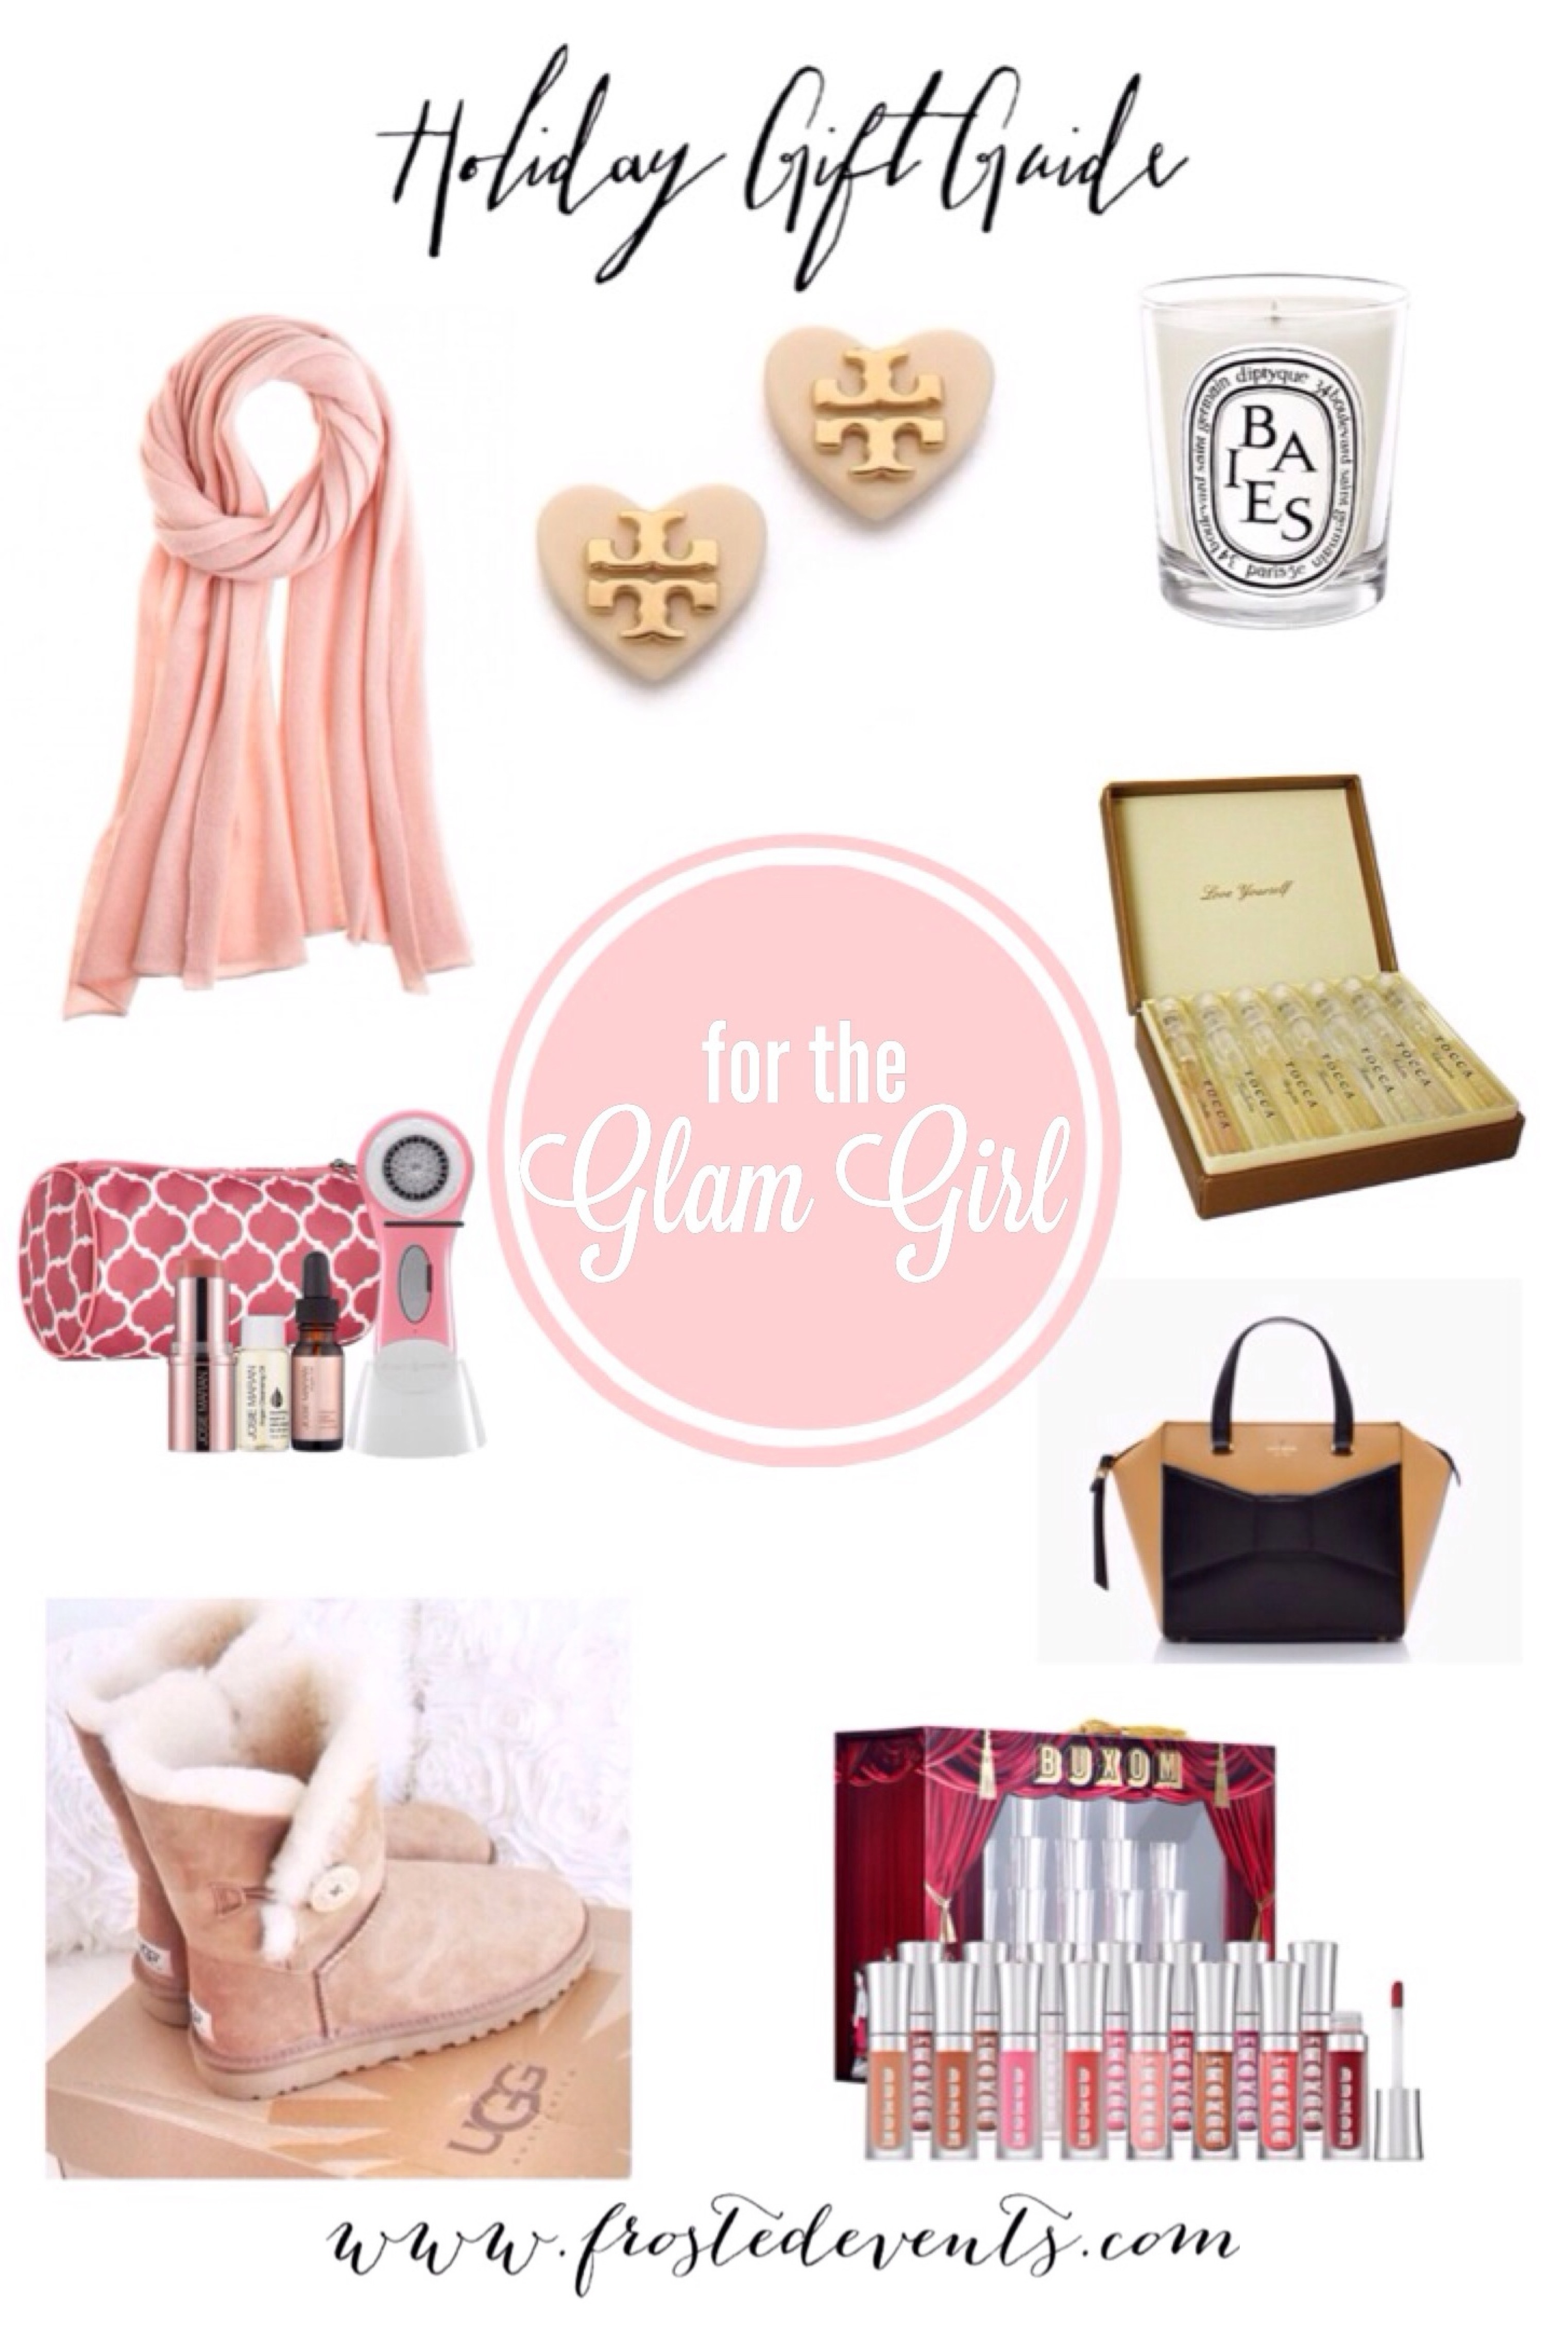 Holiday Gift Guide for the Glam Girl www.frostedevents.com Christmas Gift List for Her